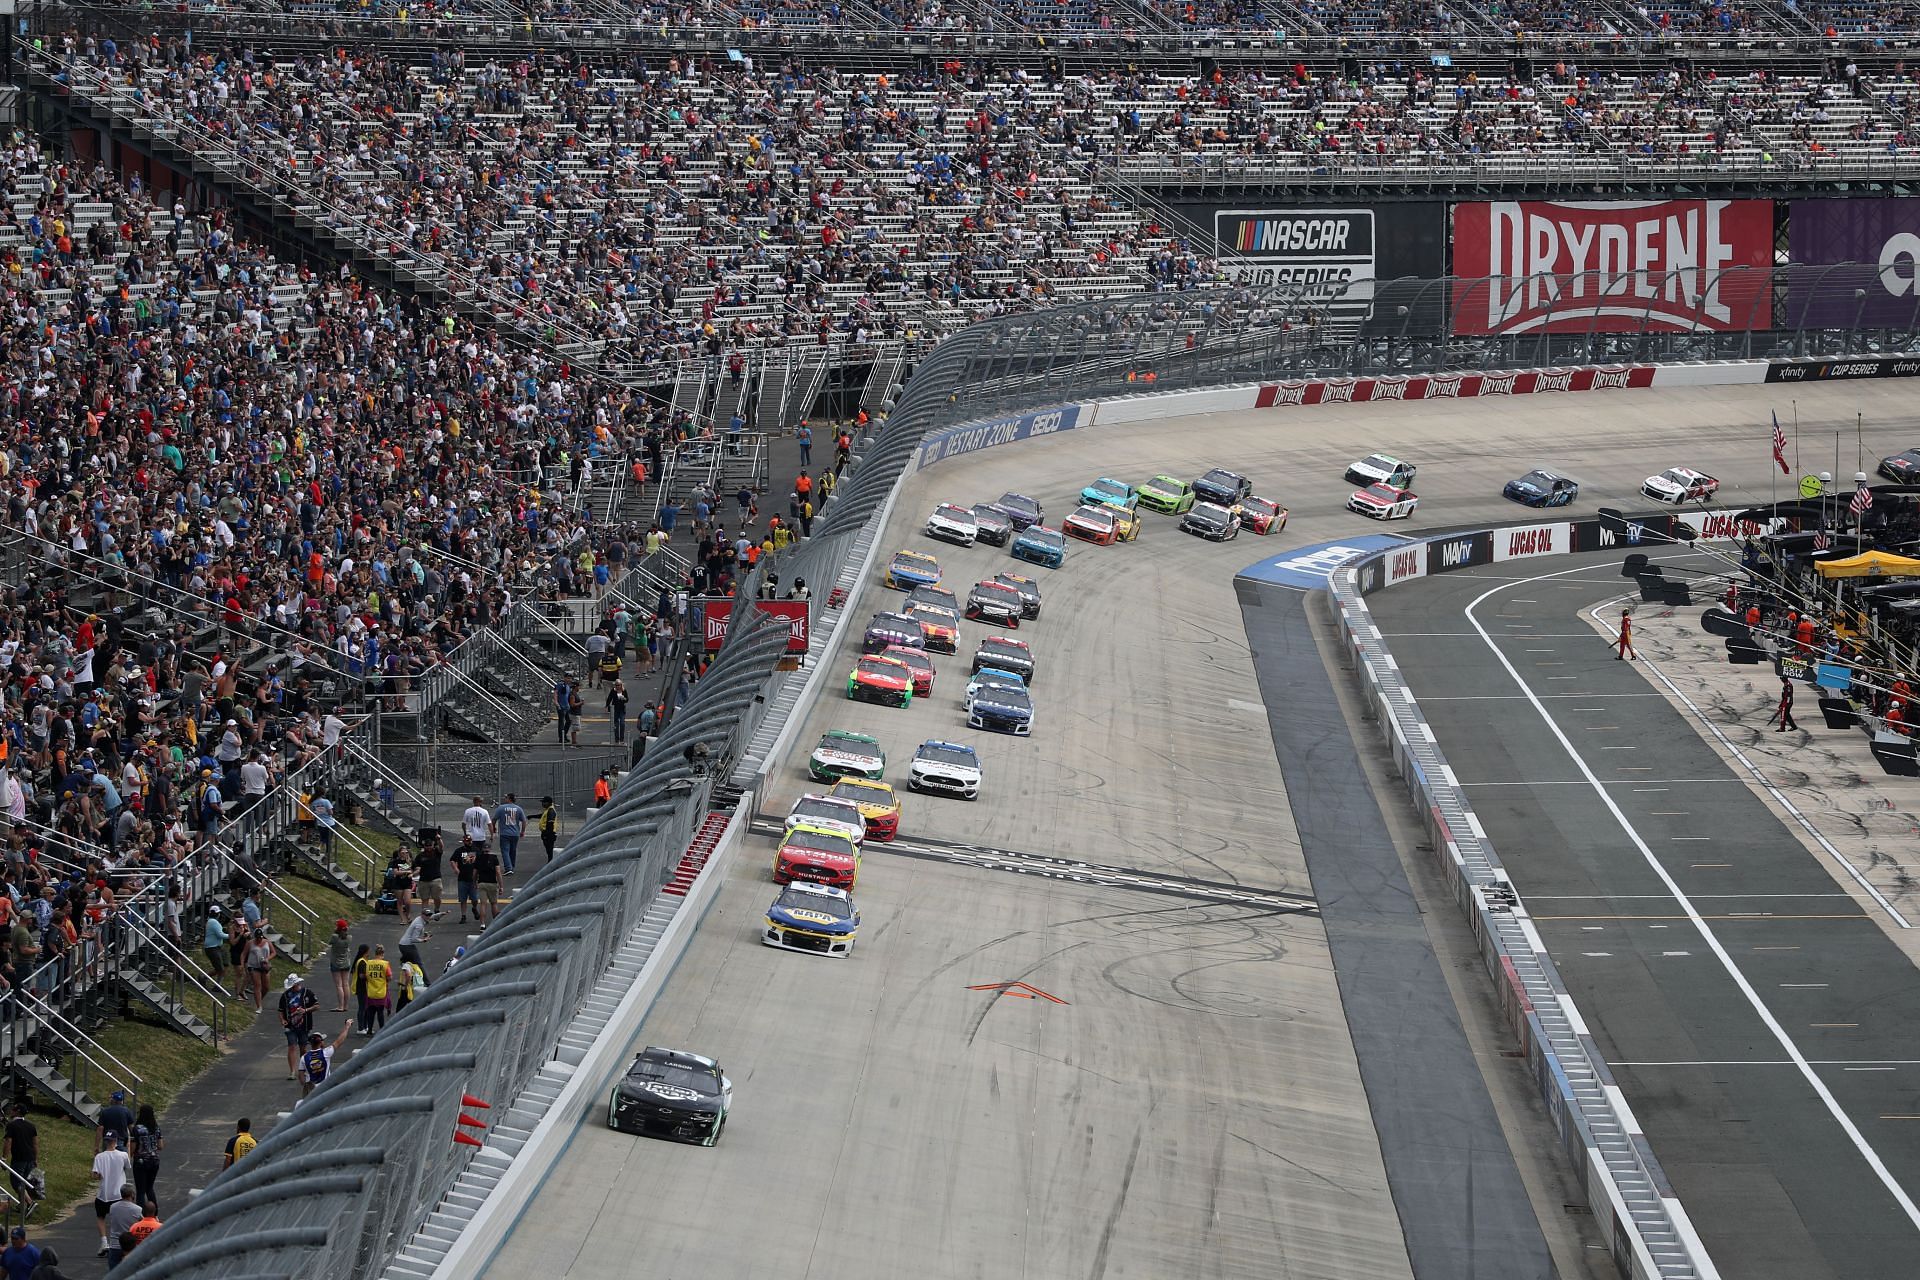 Kyle Larson leads the field during the 2021 Cup Series Drydene 400 at Dover Motor Speedway in Dover, Delaware. (Photo by James Gilbert/Getty Images)